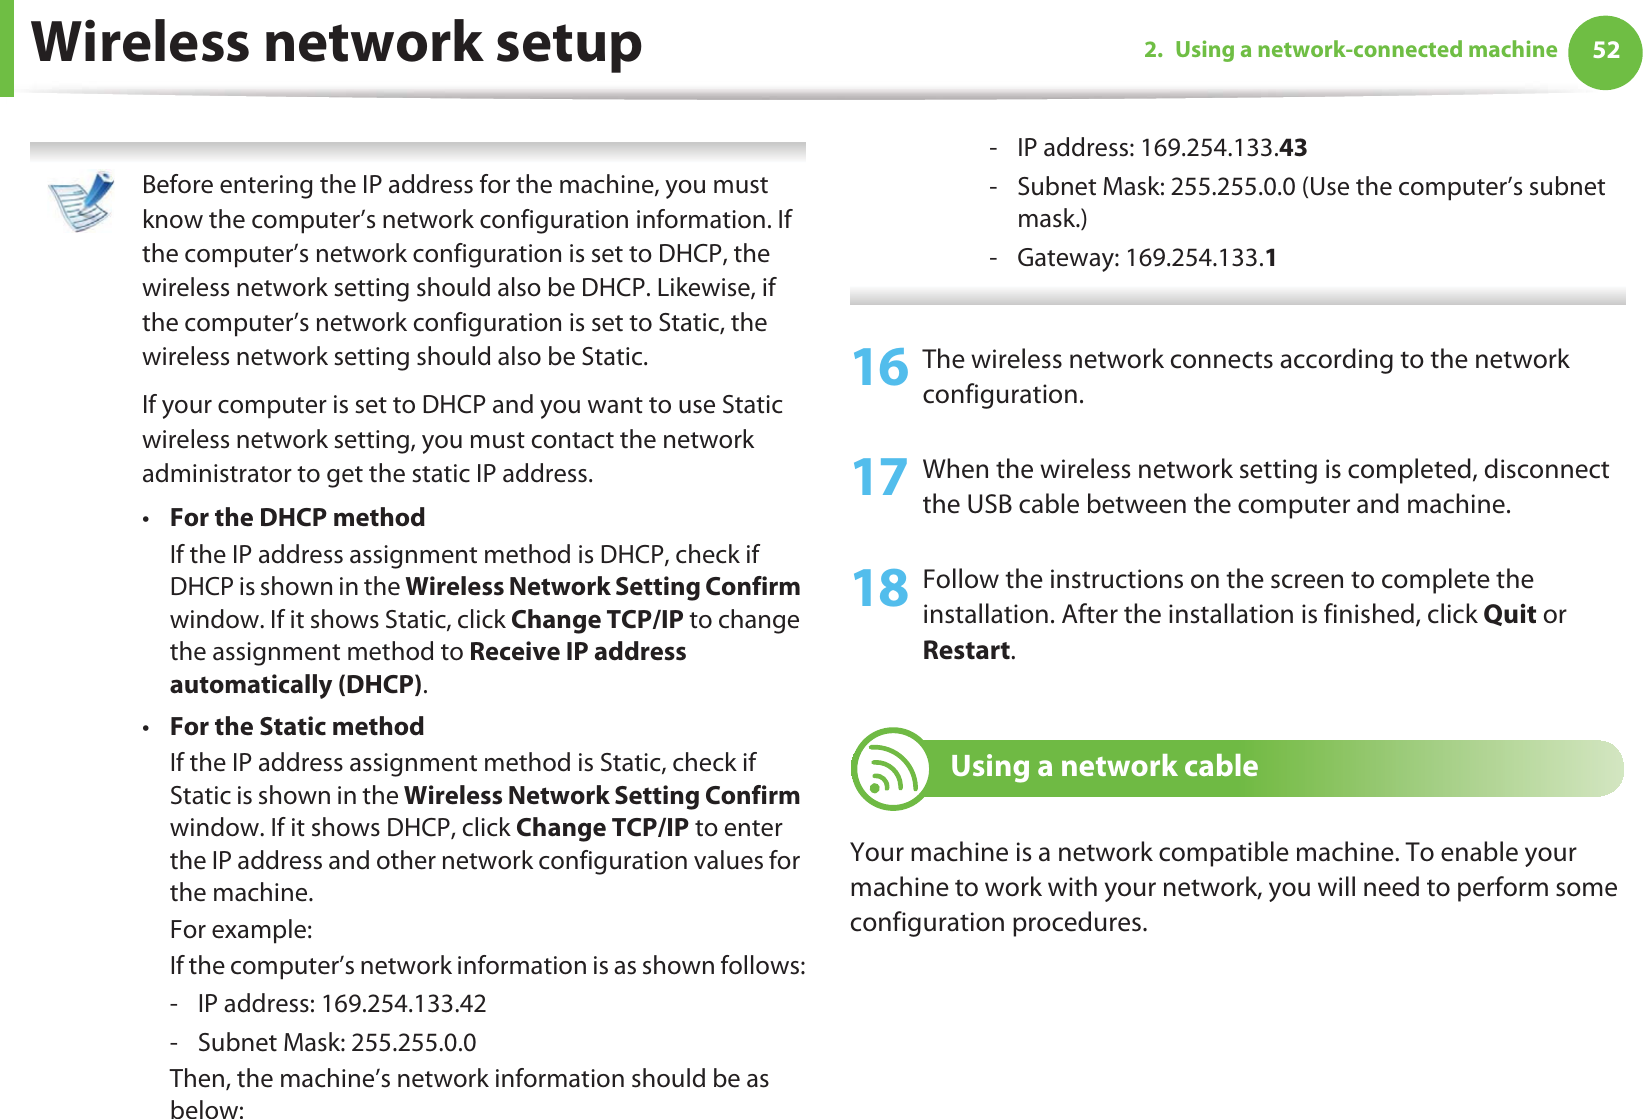 Wireless network setup 522. Using a network-connected machine Before entering the IP address for the machine, you must know the computer’s network configuration information. If the computer’s network configuration is set to DHCP, the wireless network setting should also be DHCP. Likewise, if the computer’s network configuration is set to Static, the wireless network setting should also be Static.If your computer is set to DHCP and you want to use Static wireless network setting, you must contact the network administrator to get the static IP address.•For the DHCP methodIf the IP address assignment method is DHCP, check if DHCP is shown in the Wireless Network Setting Confirm window. If it shows Static, click Change TCP/IP to change the assignment method to Receive IP address automatically (DHCP).•For the Static methodIf the IP address assignment method is Static, check if Static is shown in the Wireless Network Setting Confirm window. If it shows DHCP, click Change TCP/IP to enter the IP address and other network configuration values for the machine.For example:If the computer’s network information is as shown follows:- IP address: 169.254.133.42- Subnet Mask: 255.255.0.0Then, the machine’s network information should be as below:- IP address: 169.254.133.43- Subnet Mask: 255.255.0.0 (Use the computer’s subnet mask.)- Gateway: 169.254.133.1 16 The wireless network connects according to the network configuration.17 When the wireless network setting is completed, disconnect the USB cable between the computer and machine. 18 Follow the instructions on the screen to complete the installation. After the installation is finished, click Quit or Restart.19 Using a network cableYour machine is a network compatible machine. To enable your machine to work with your network, you will need to perform some configuration procedures.